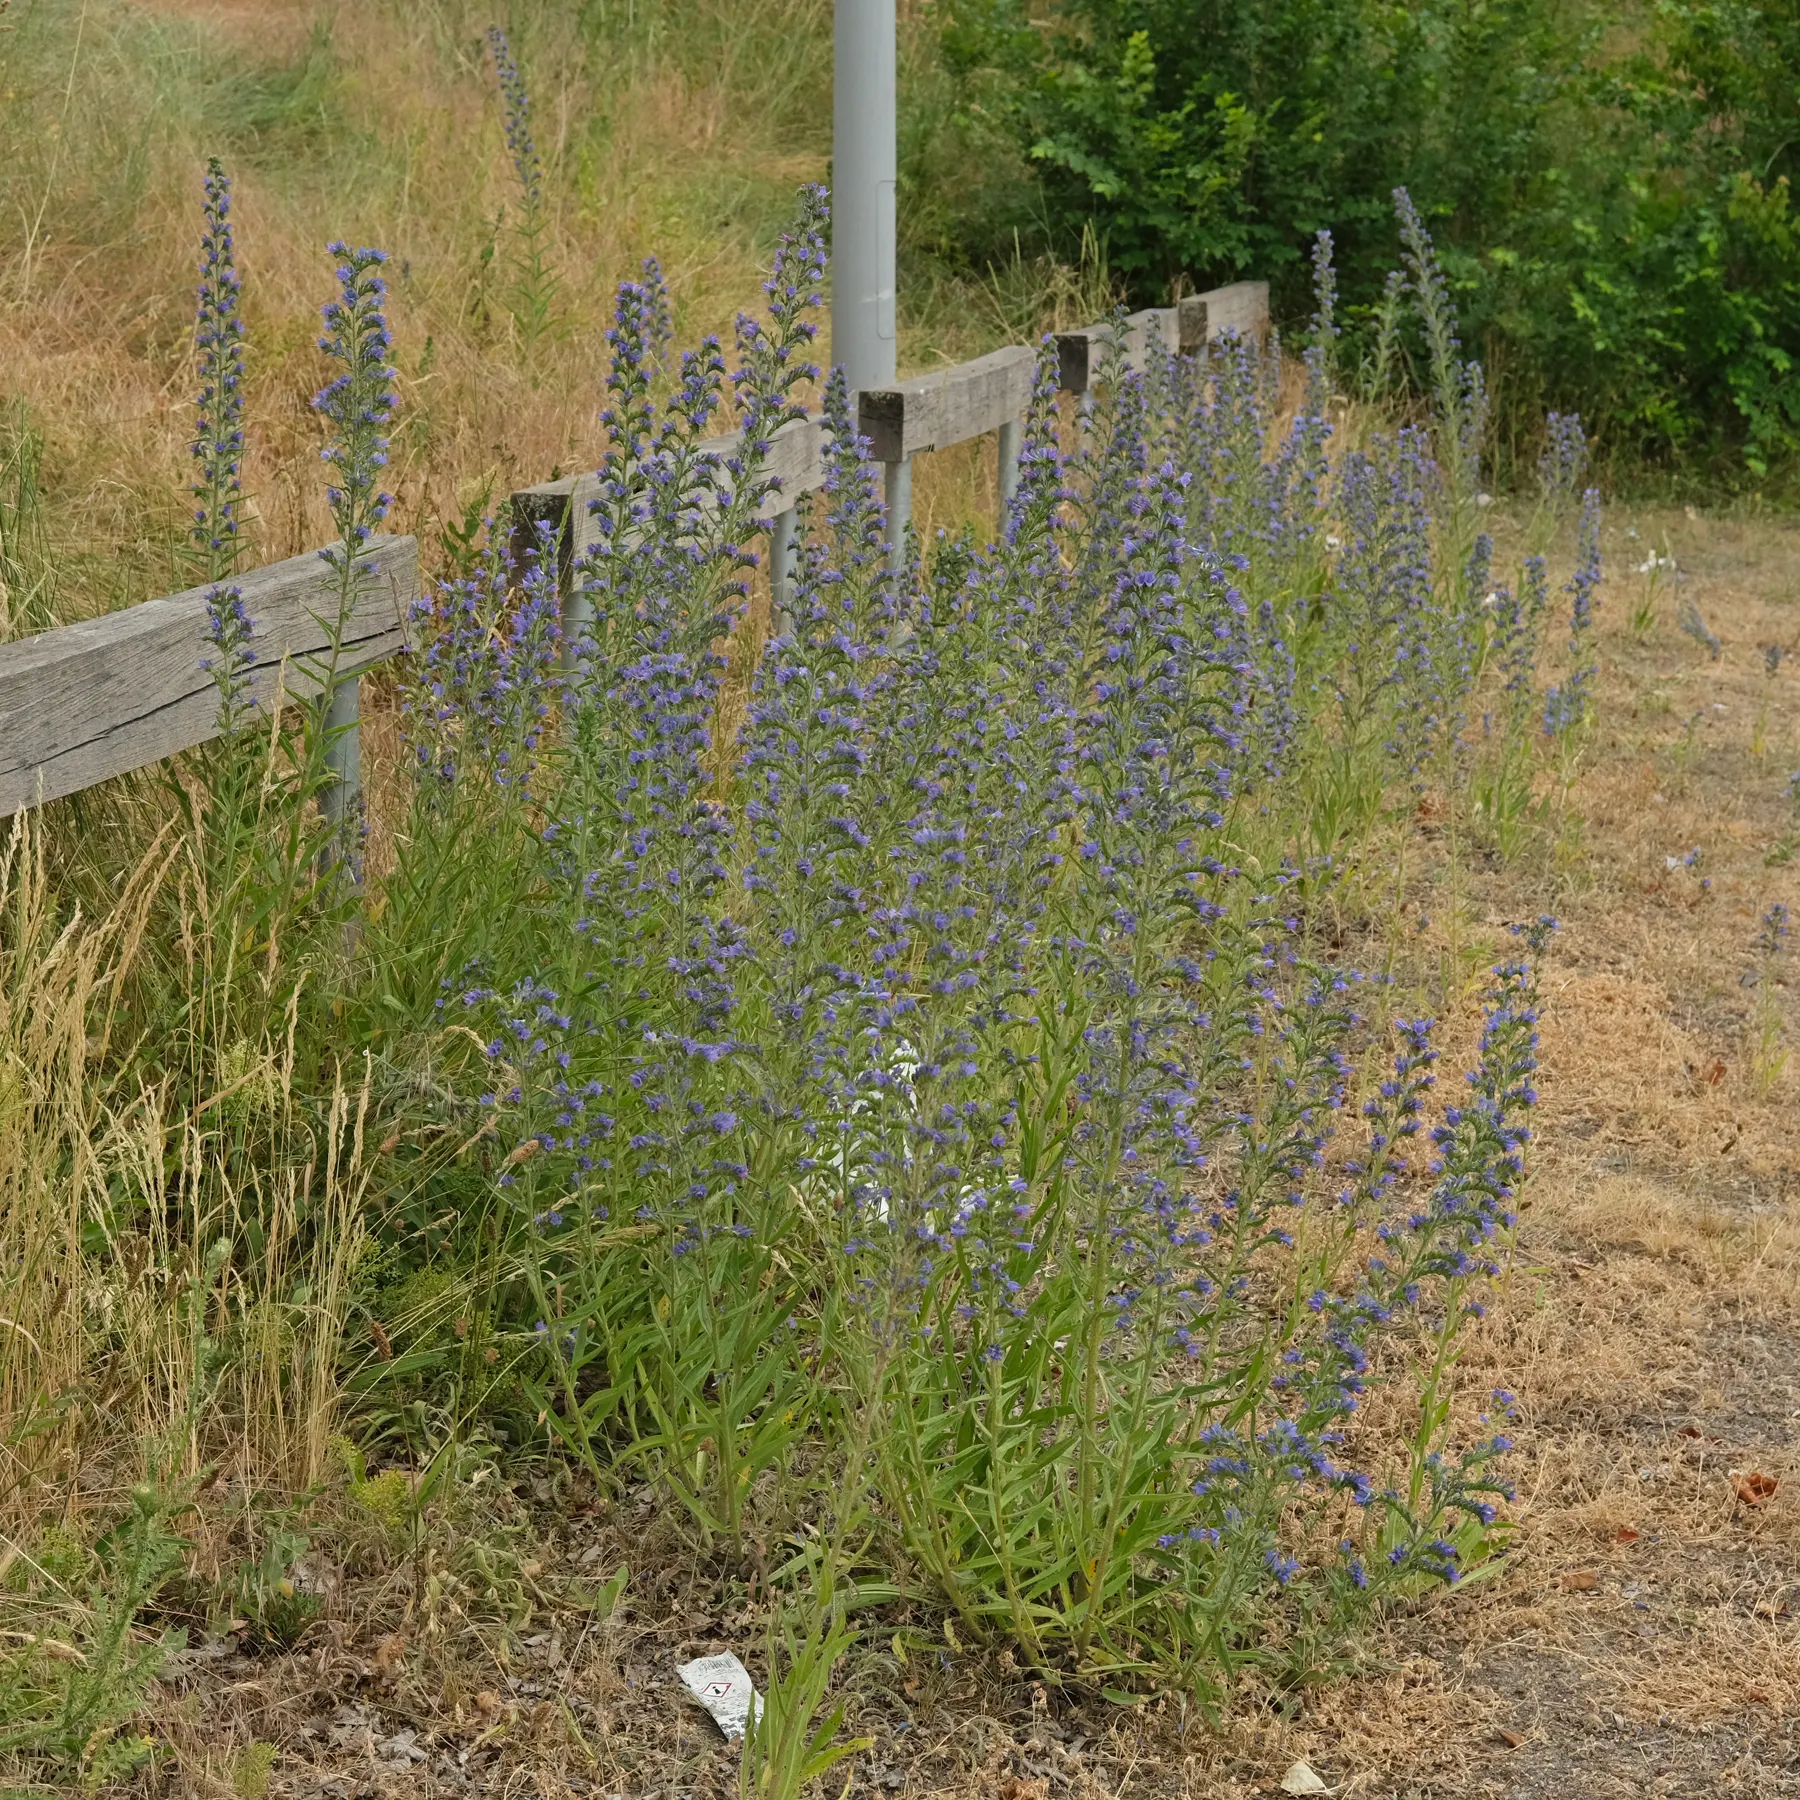 Viper's bugloss in a parking lot